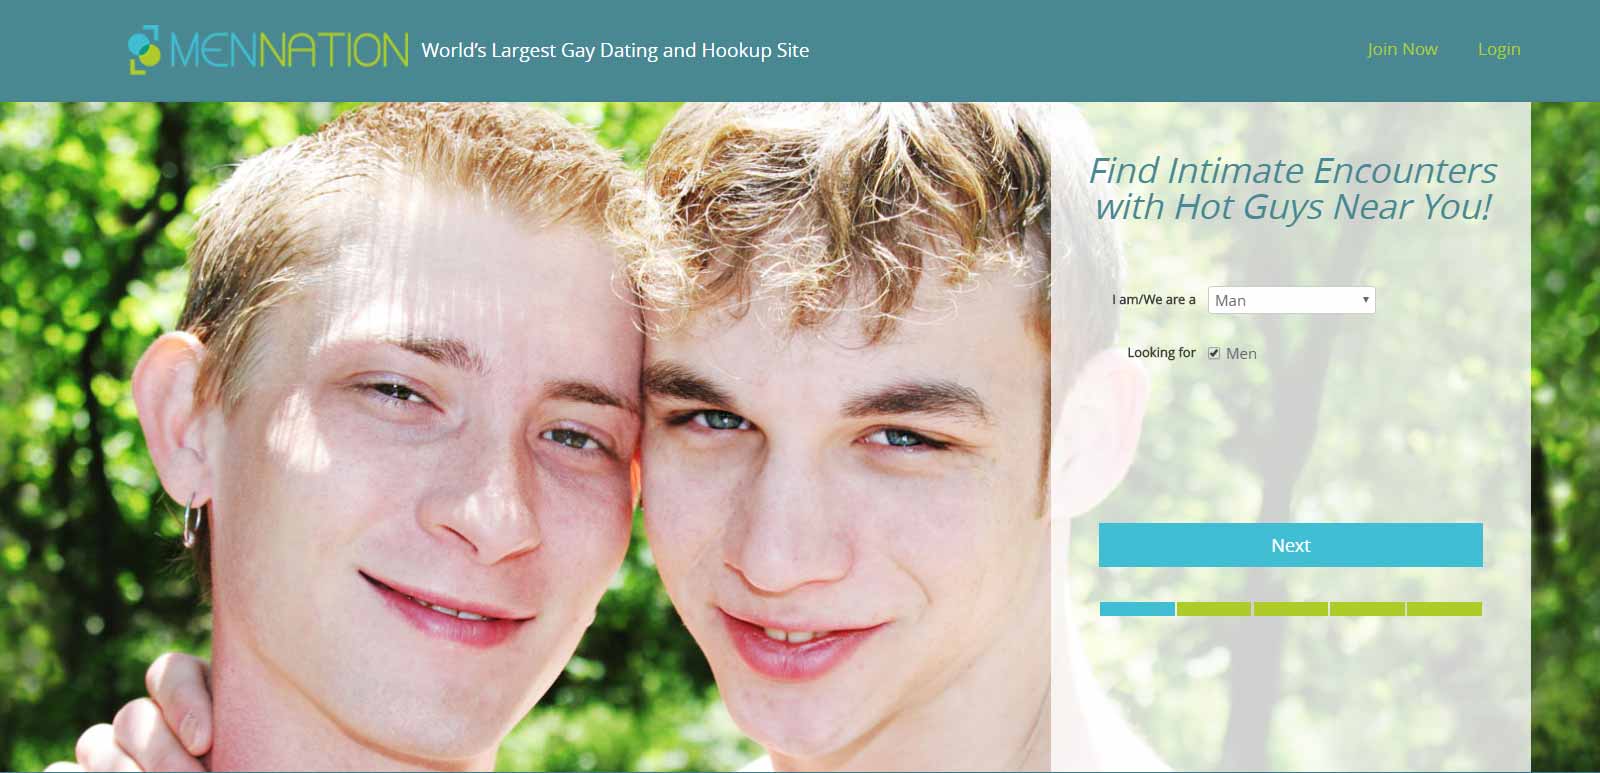 Elite dating service gay and lesbian